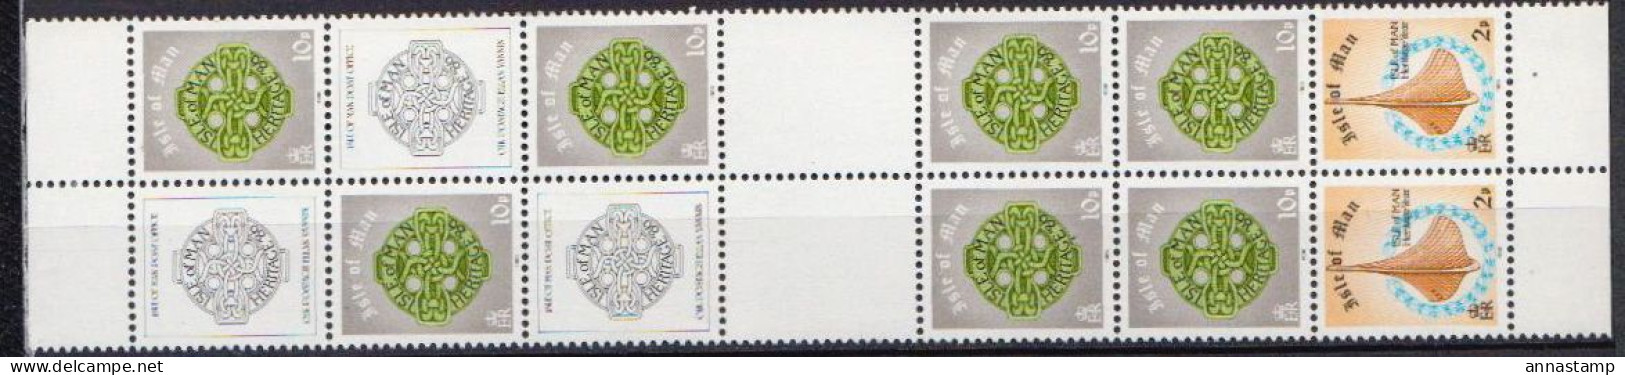 Isle Of Man MNH Booklet Pane - Timbres